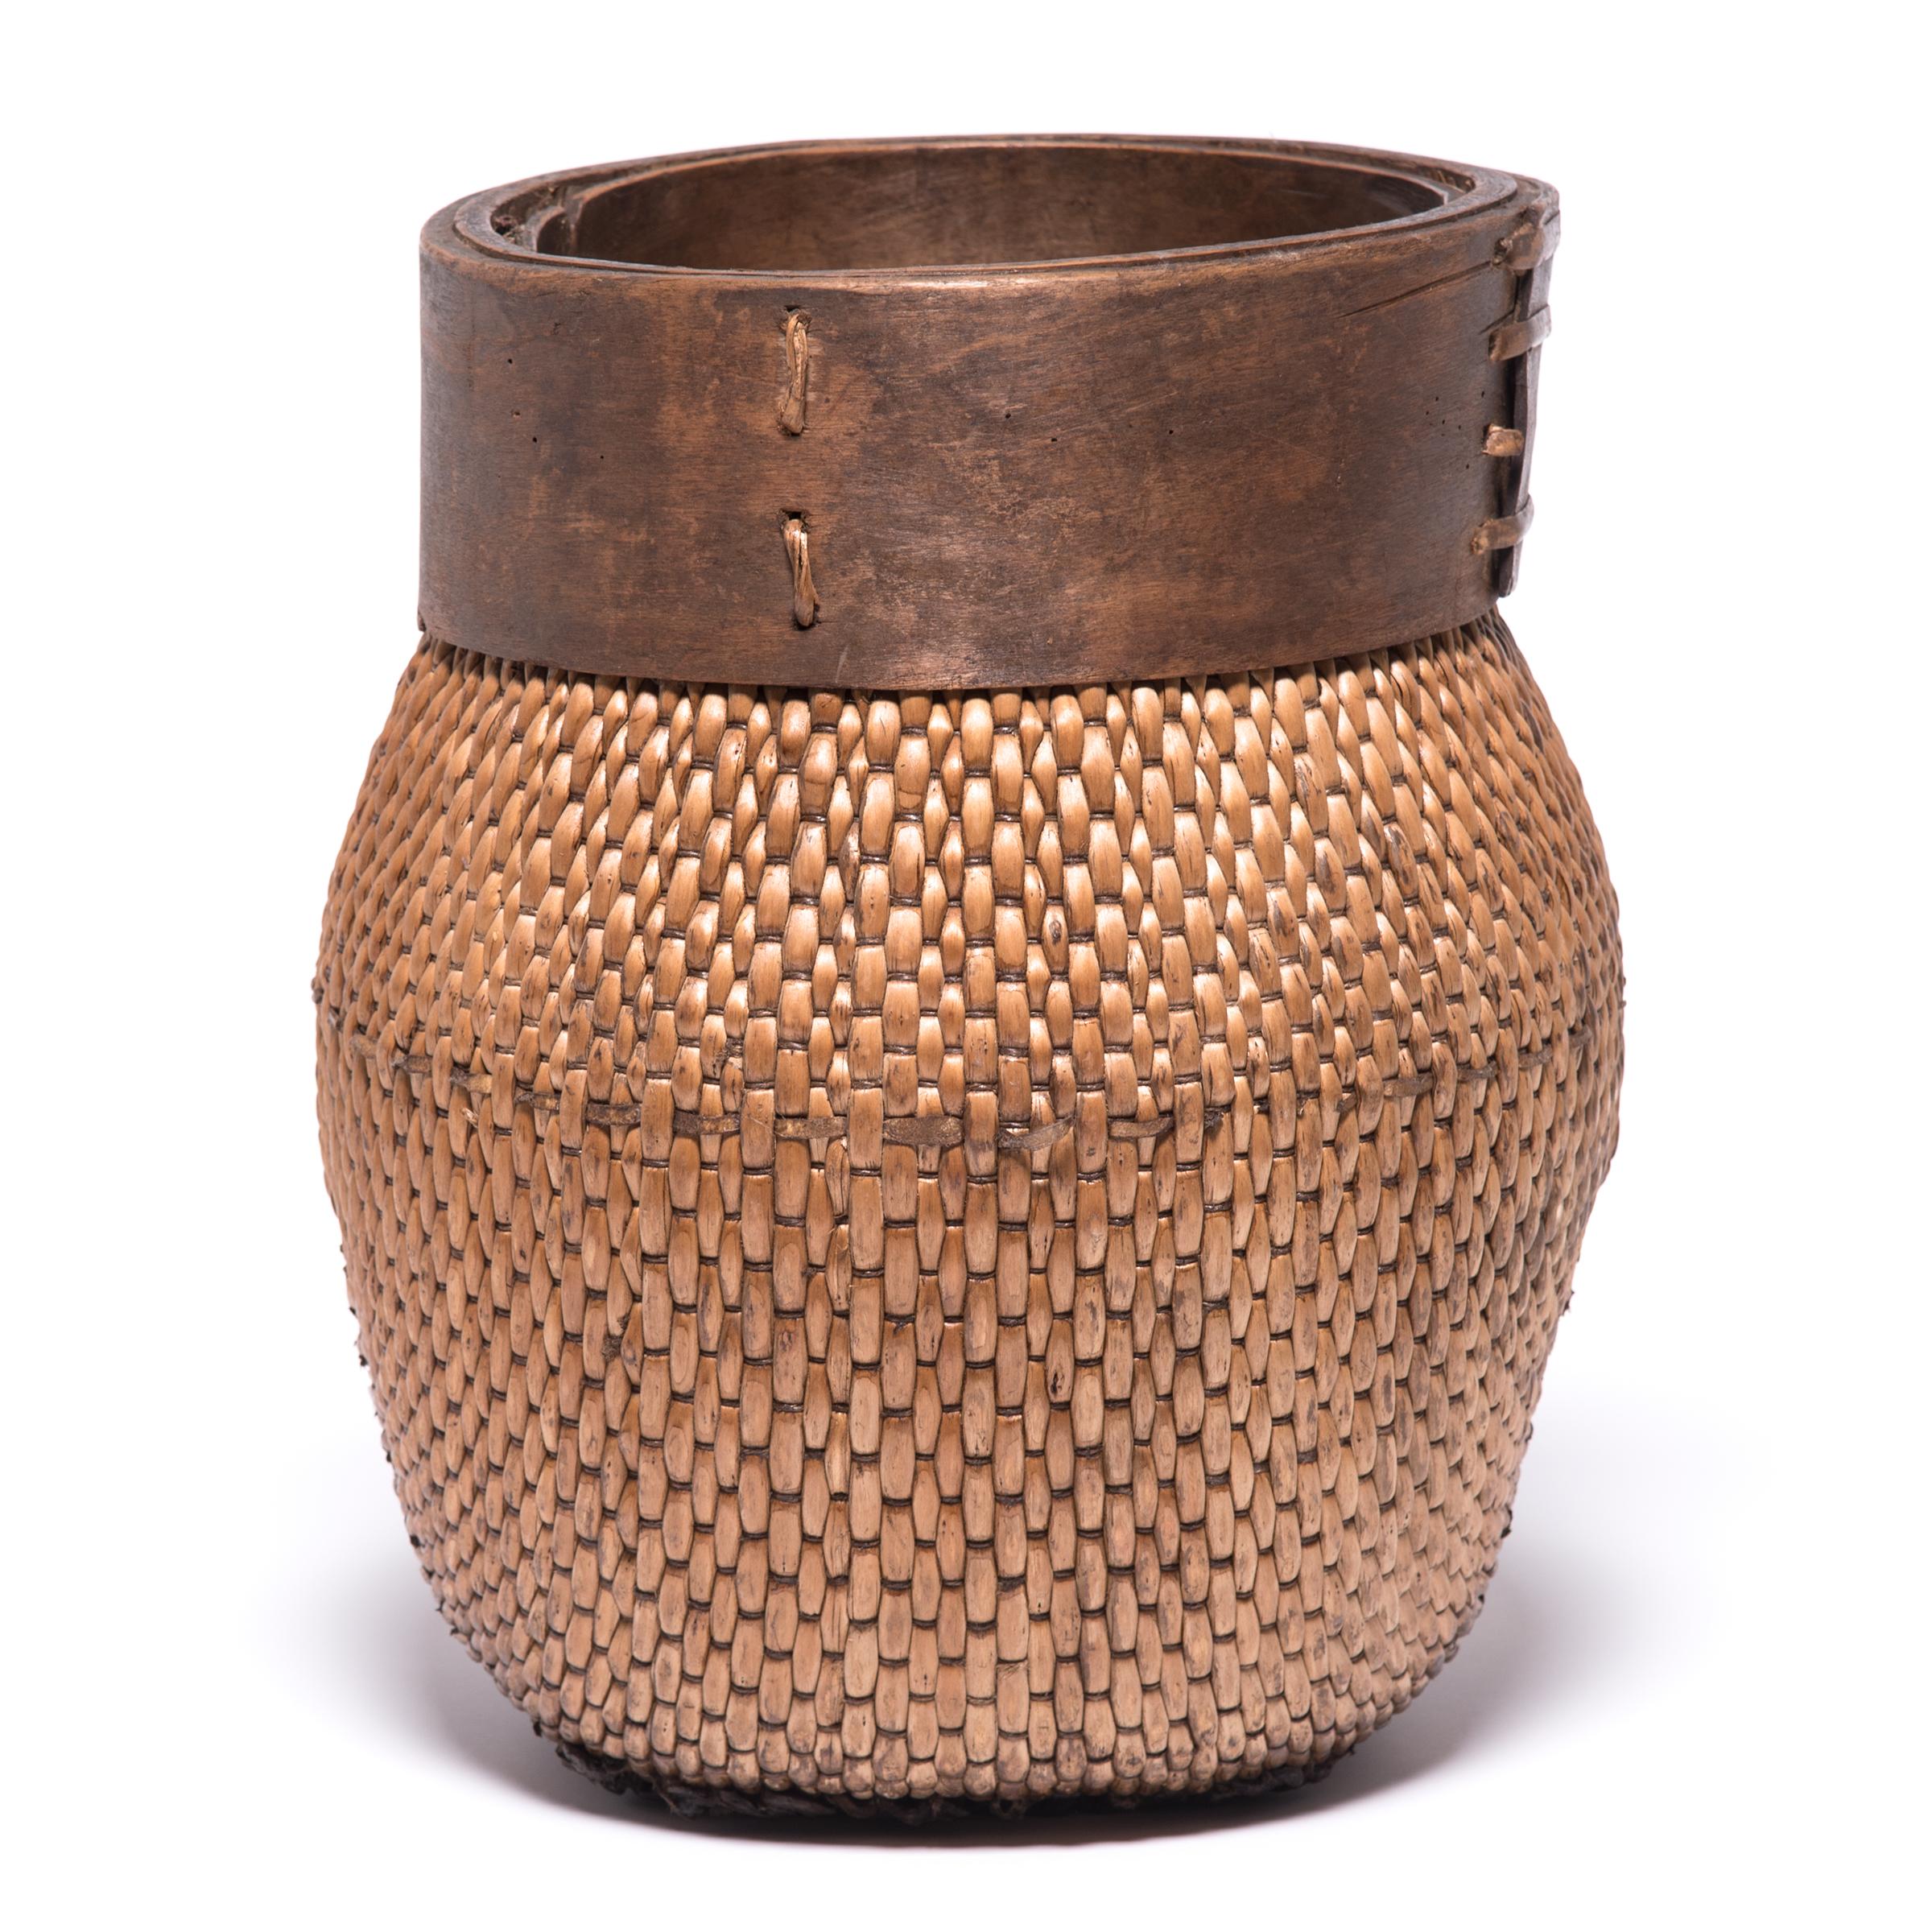 Centuries ago, a reed fisherman’s basket like this one would have been fairly common in rural China: an everyday item that would have been used until it was worn through. This particular example remains in beautiful condition and so a century later,